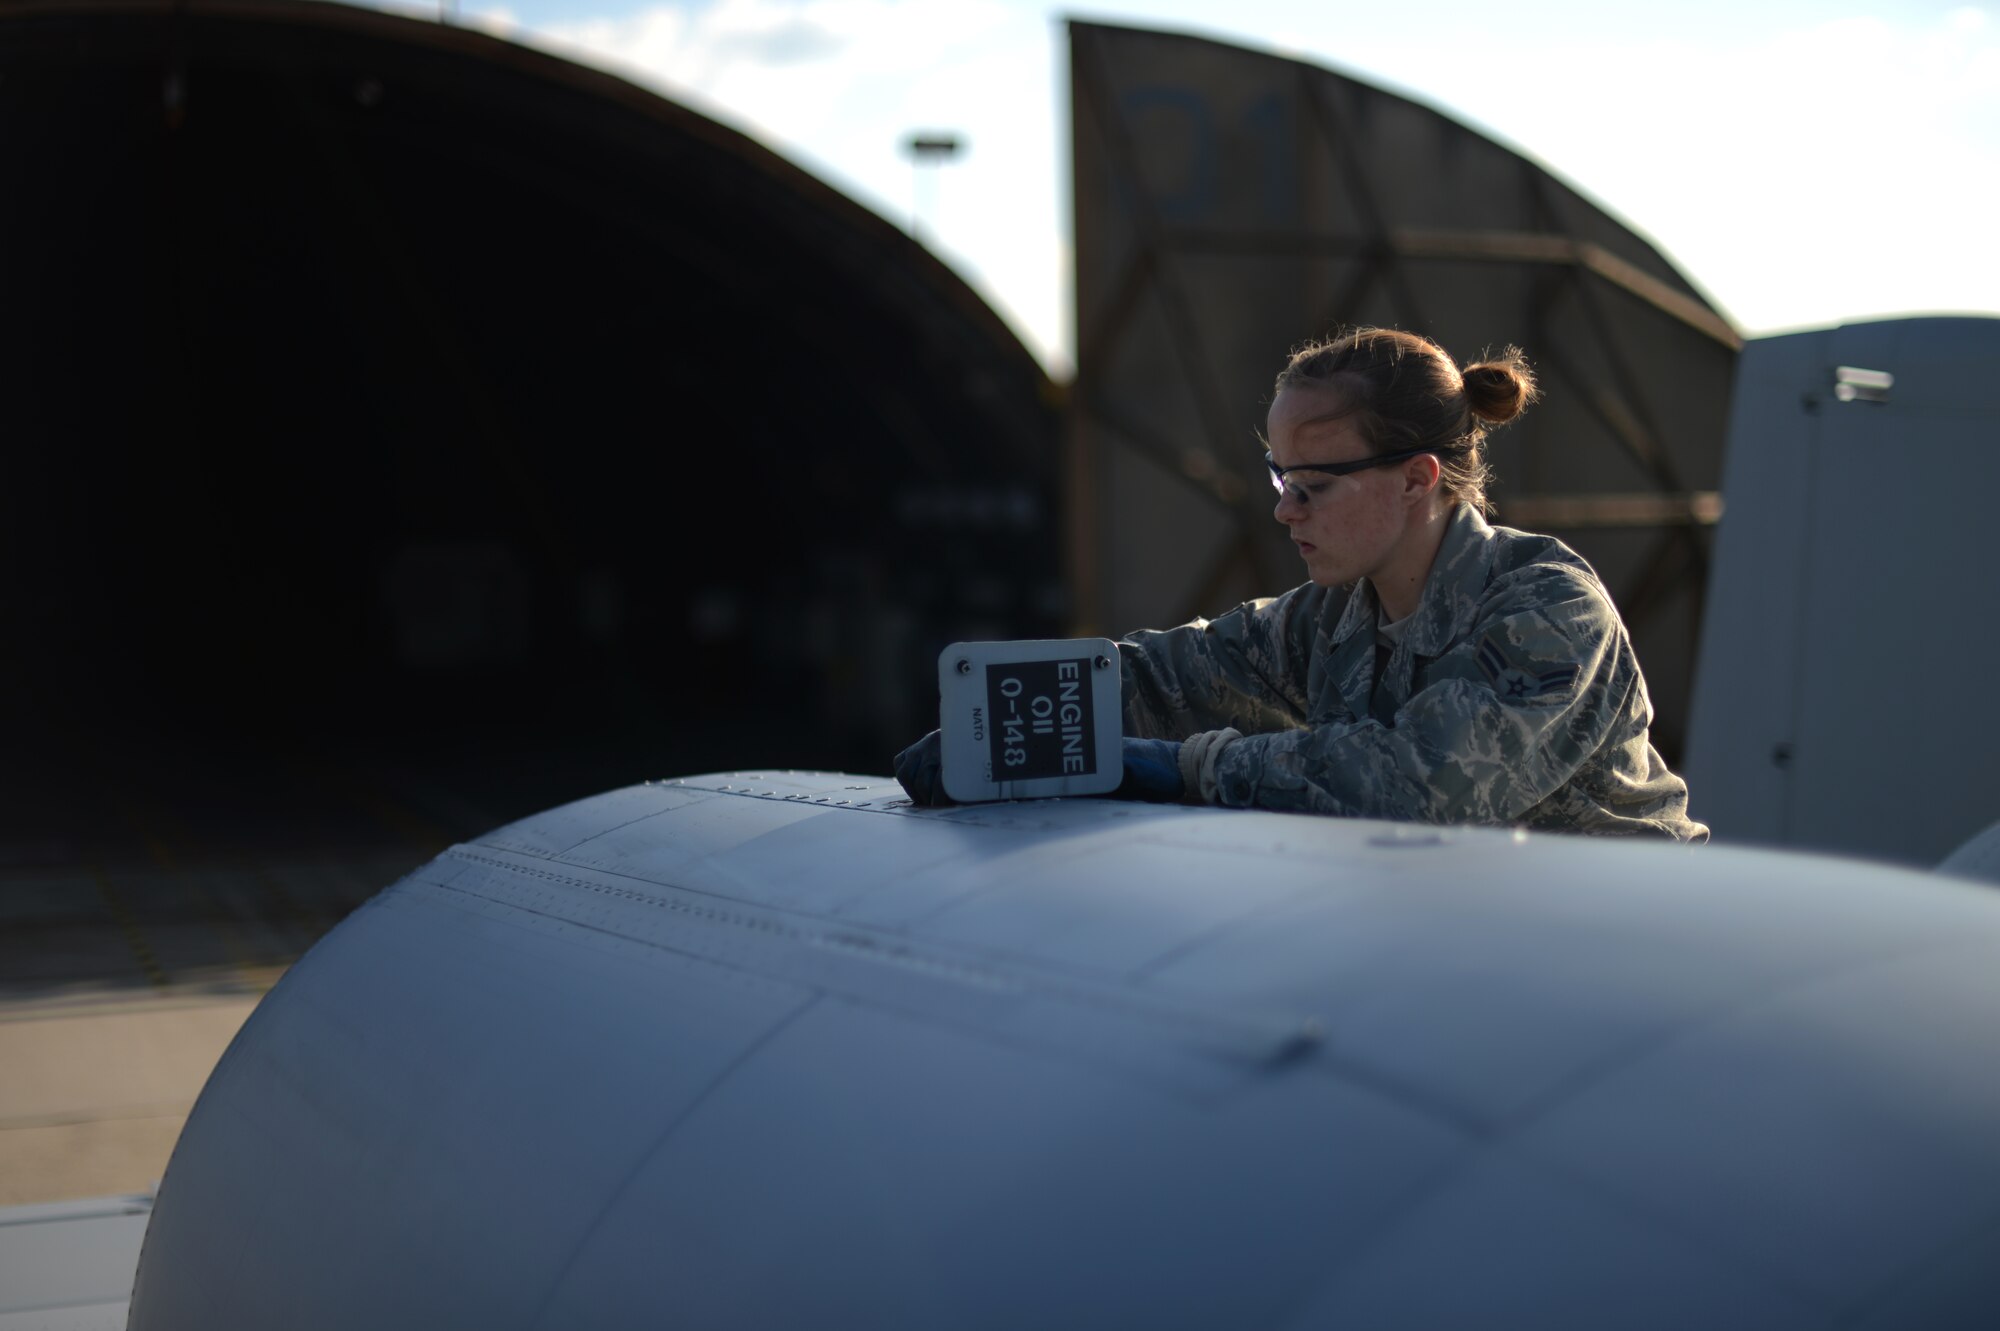 U.S. Air Force Airman 1st Class Natalya Brechlin, 124th Aircraft Maintenance Squadron crew chief from Boise, Idaho, checks the oil of a U.S. Air Force A-10 Thunderbolt II attack aircraft on the flightline at Spangdahlem Air Base, Germany, May 16, 2014. Airmen check oil after every flight to maintain the proper level and cleanliness of fluids inside the engine. (U.S. Air Force photo by Senior Airman Gustavo Castillo/Released) 